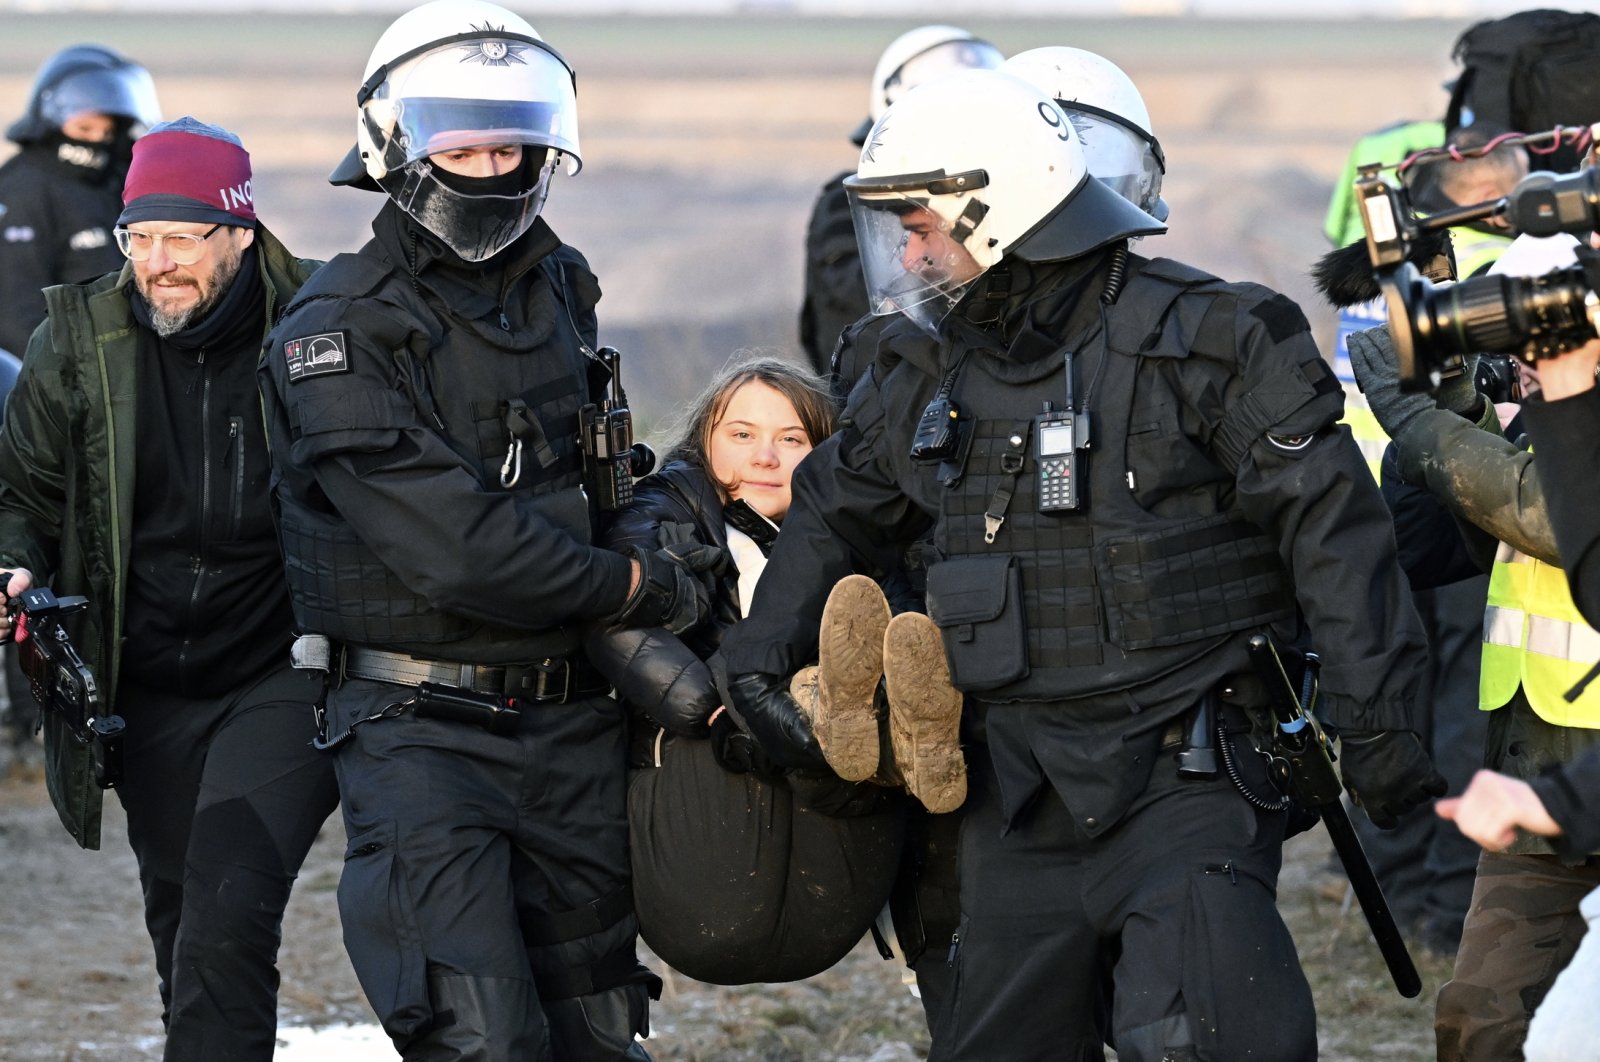 Police officers carry Swedish climate activist Greta Thunberg away from the edge of the Garzweiler II opencast lignite mine during a protest, Luetzerath, Germany, Jan. 17, 2023. (AP Photo)